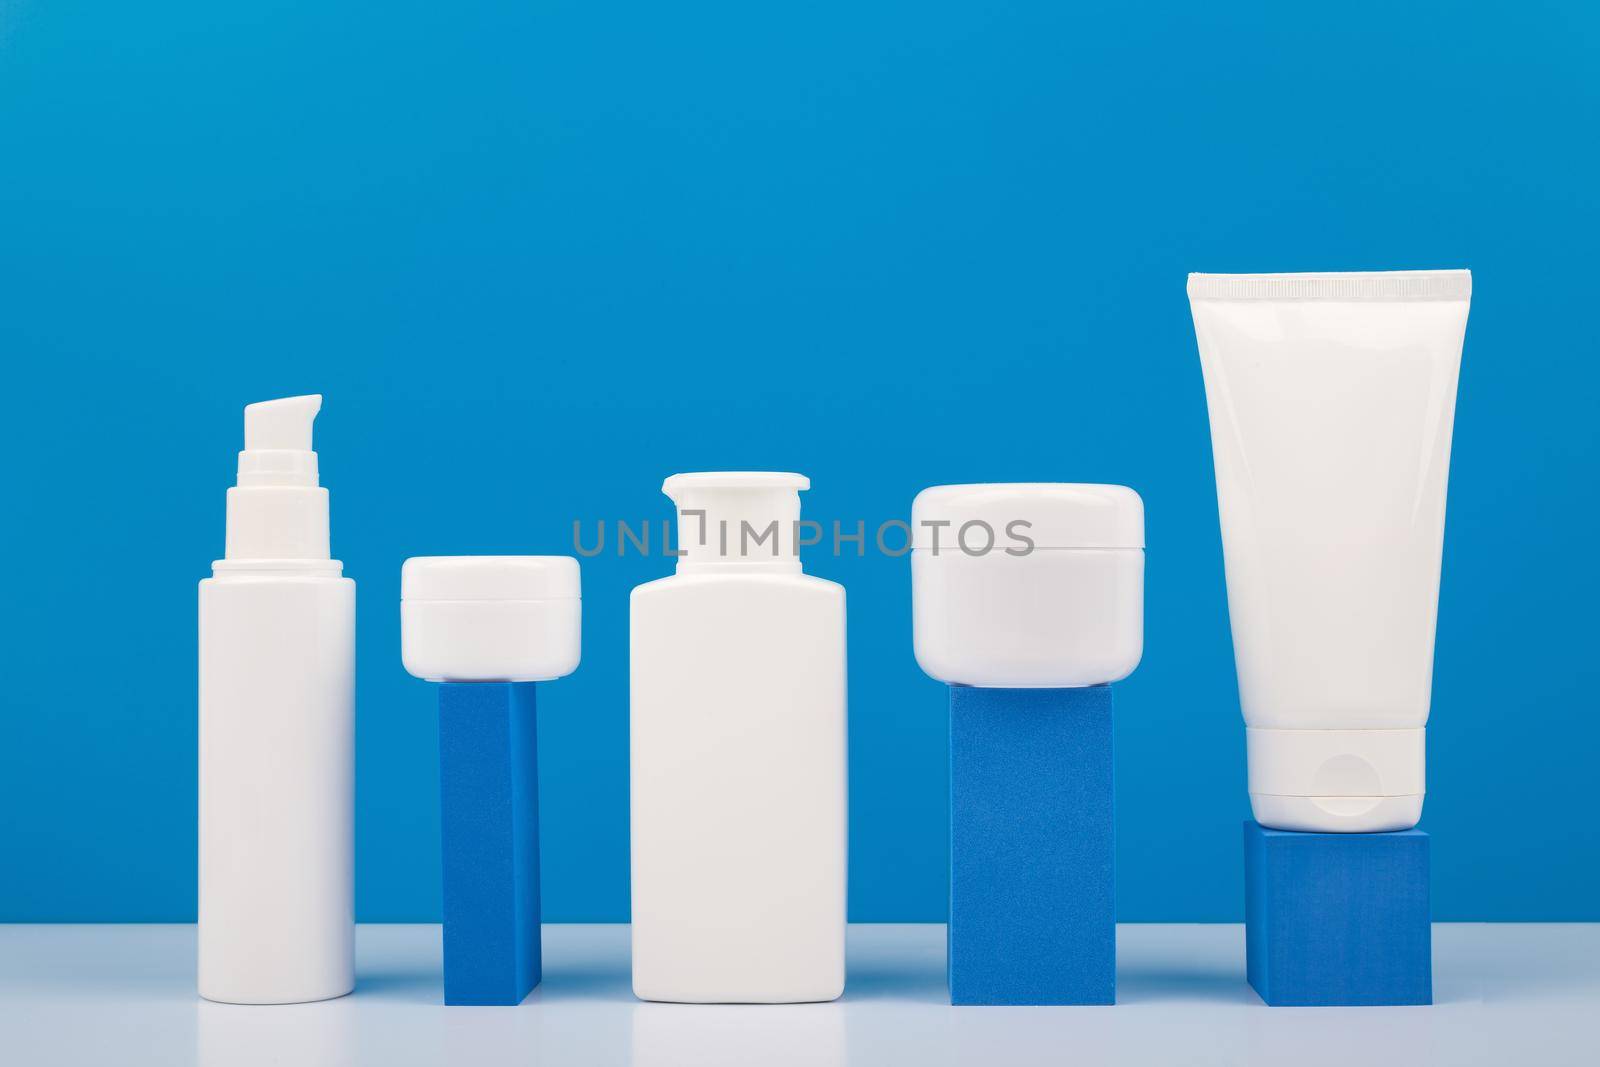 Set of cosmetic products for daily skincare on white table and geometric props against bright blue background by Senorina_Irina